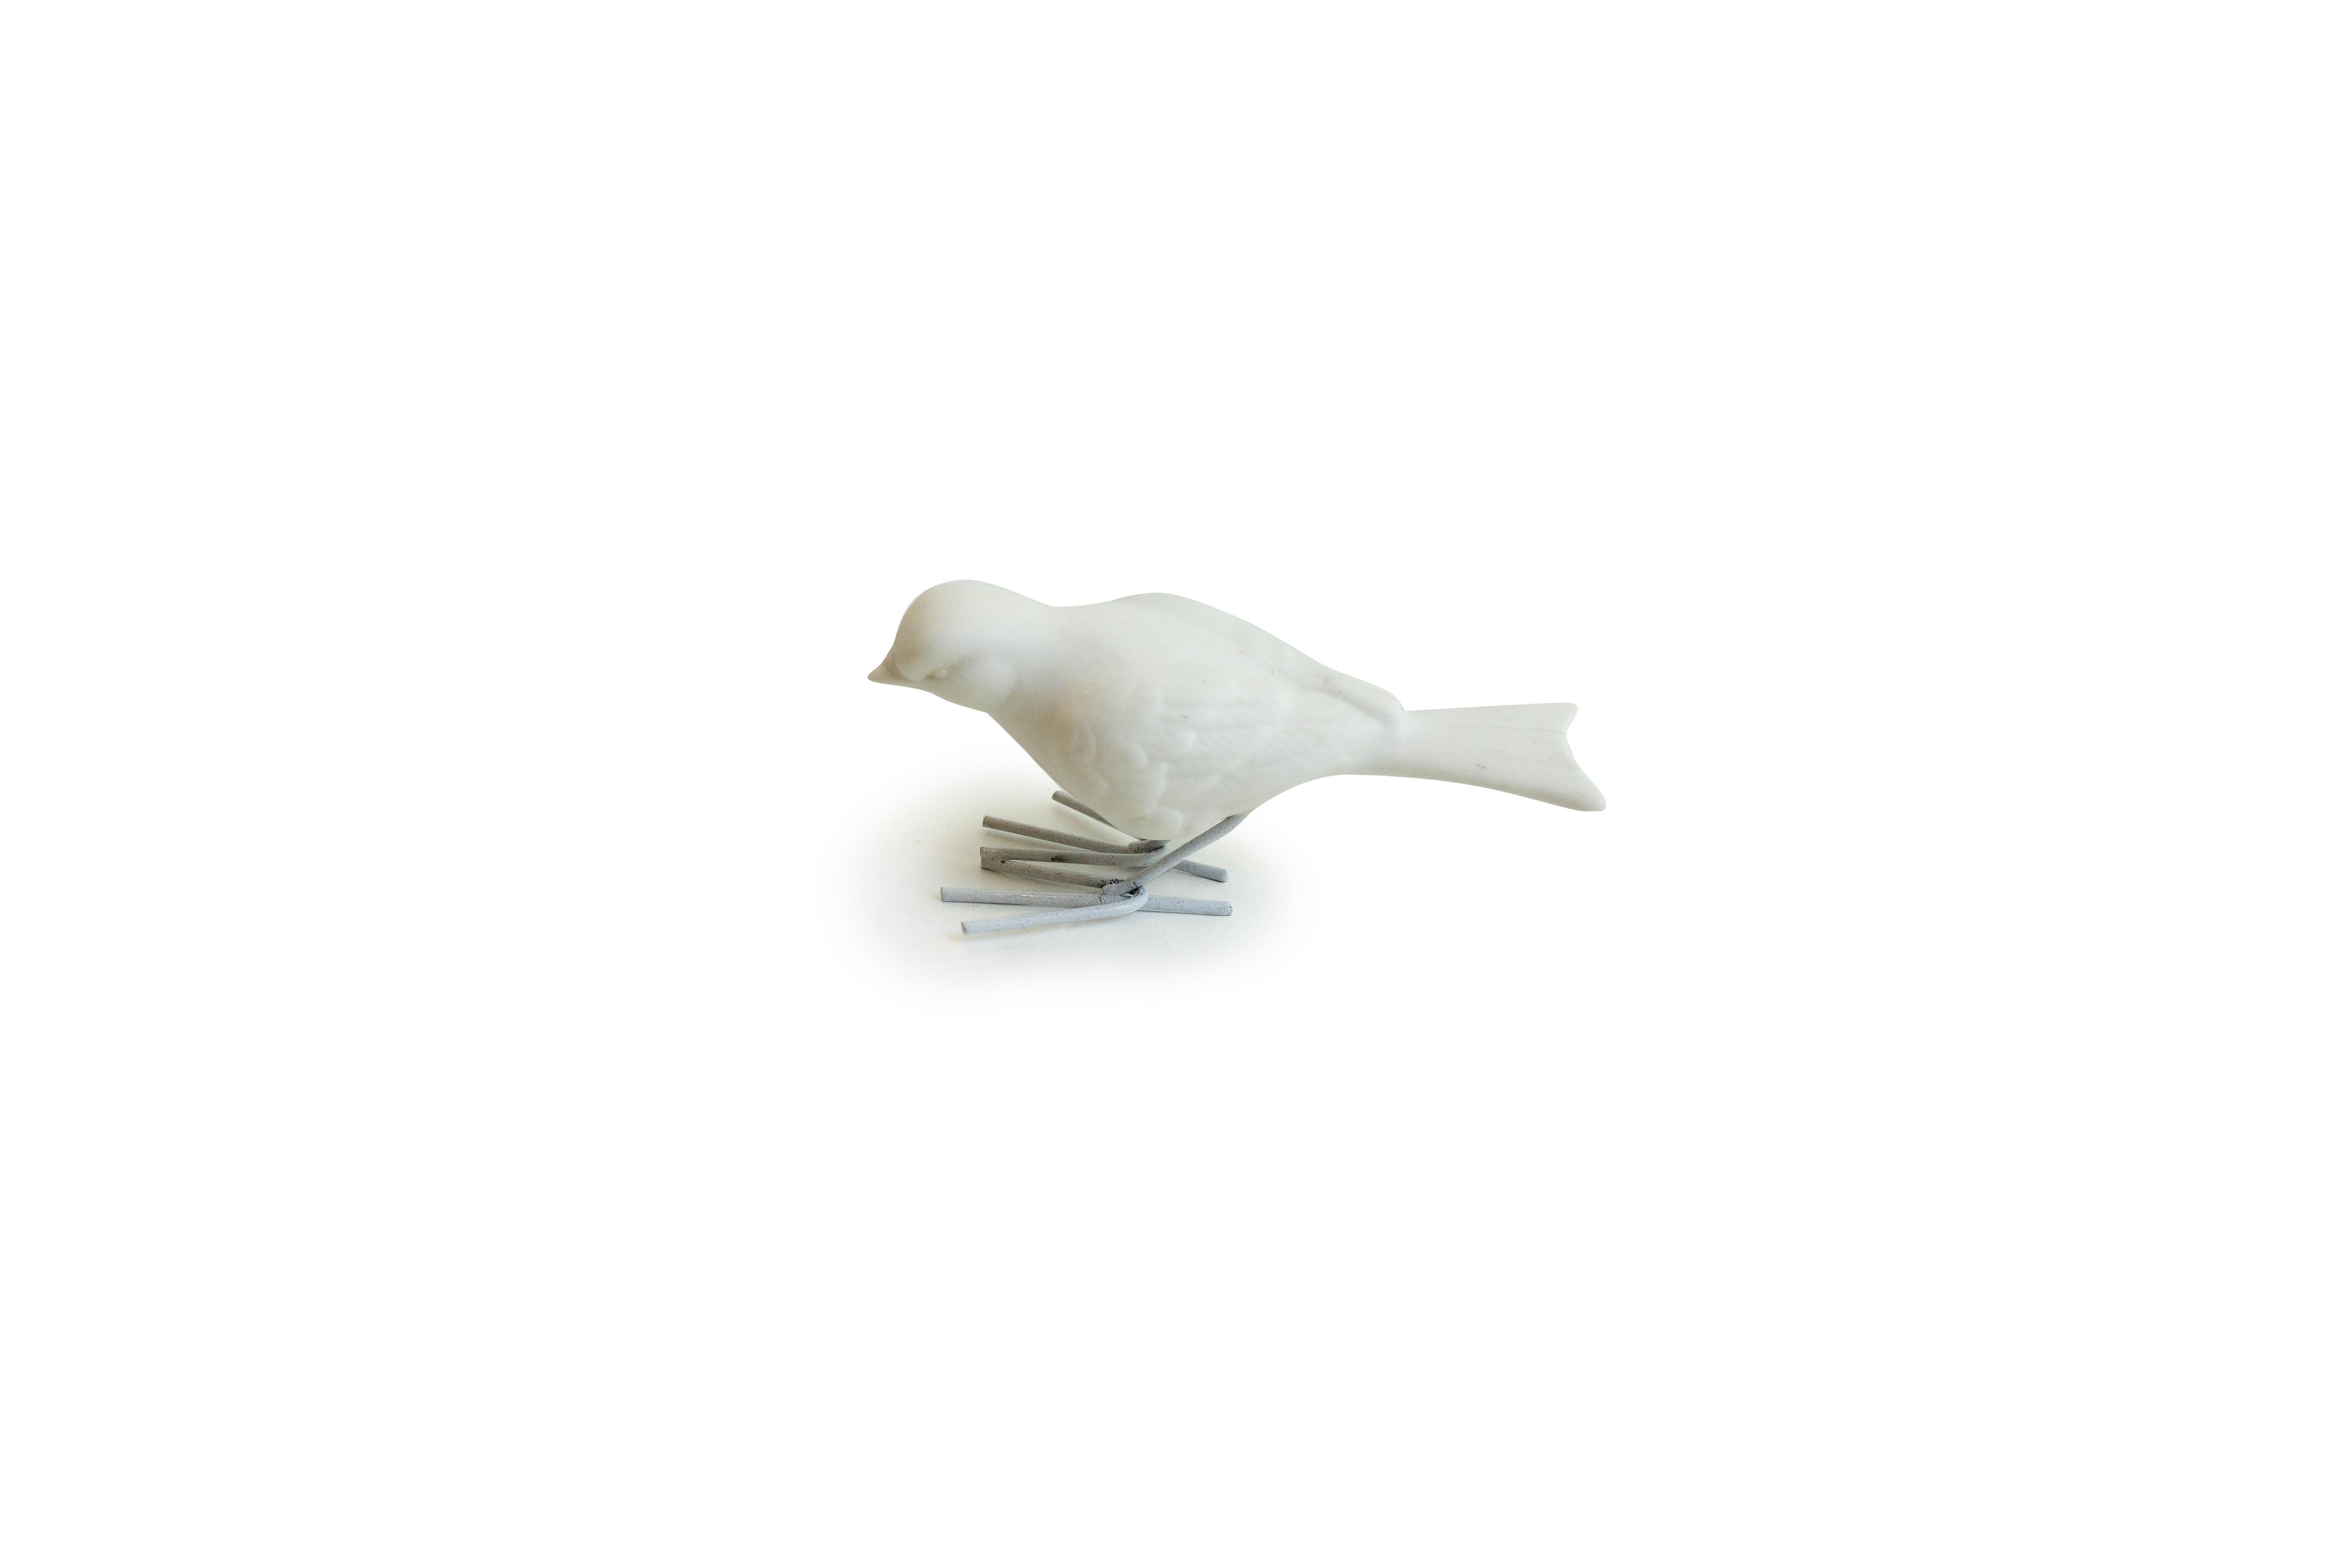 Set of 4 Unglazed White Porcelain Birds, Starlings supported by White Iron Legs  For Sale 6